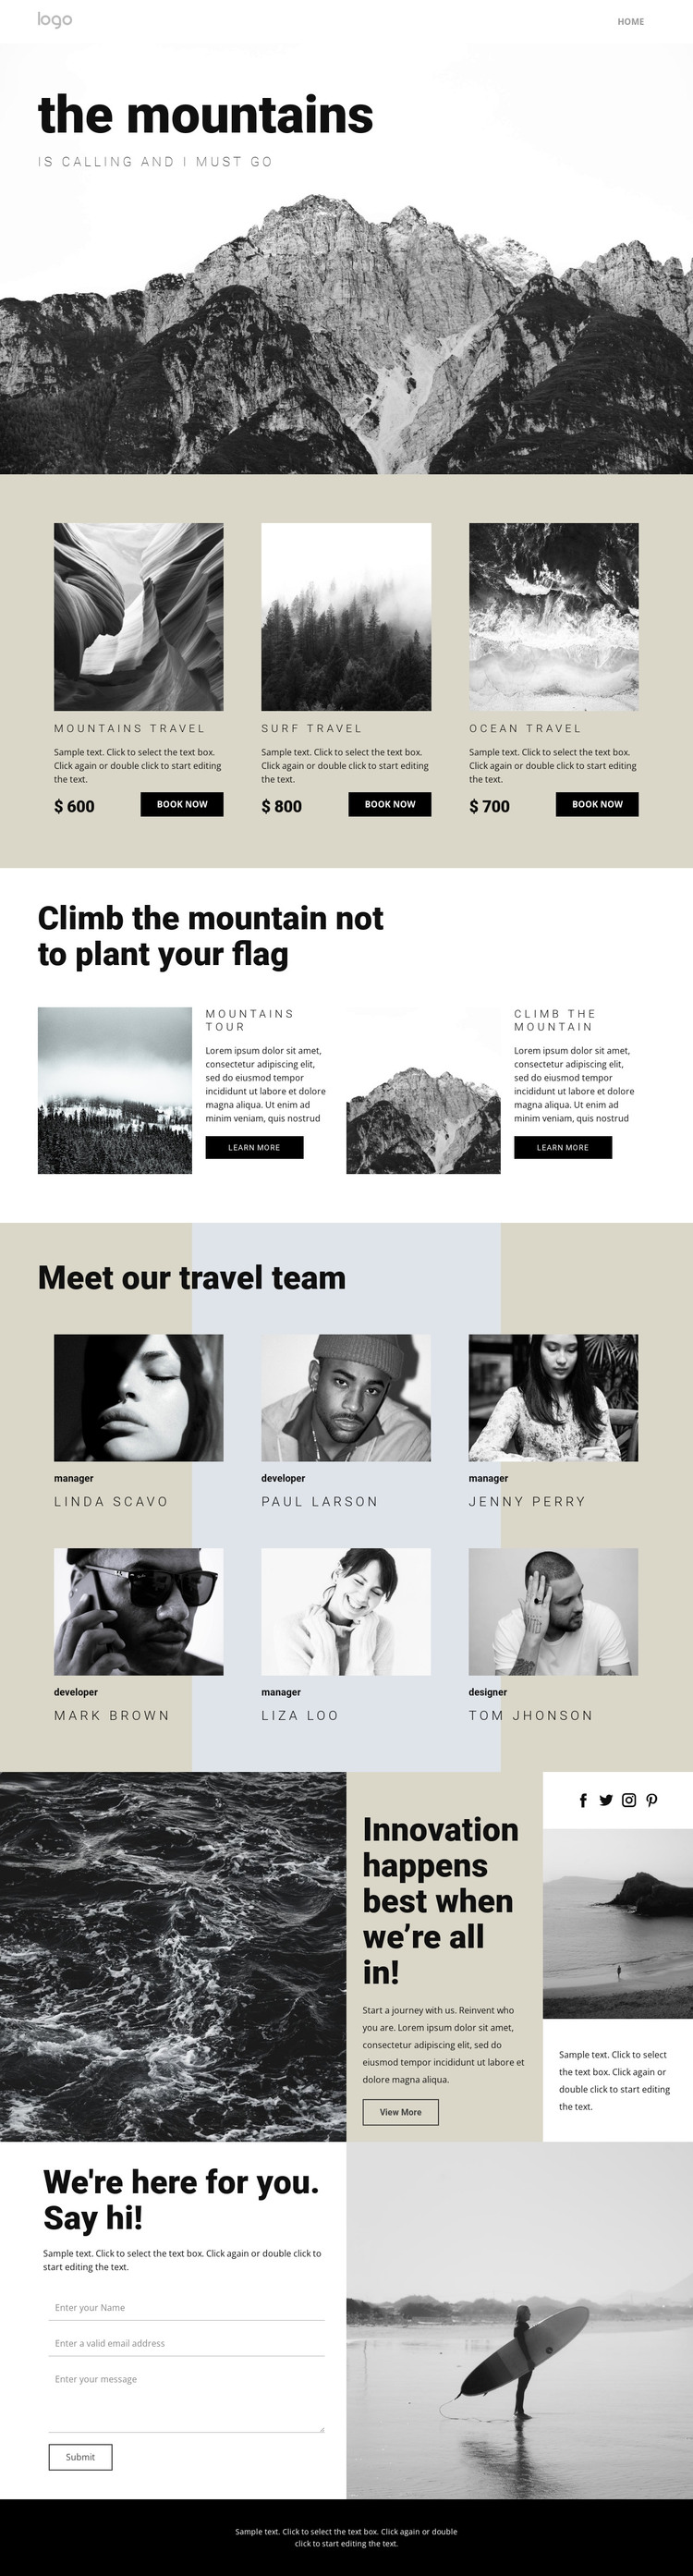 Agency for people who travel Web Design